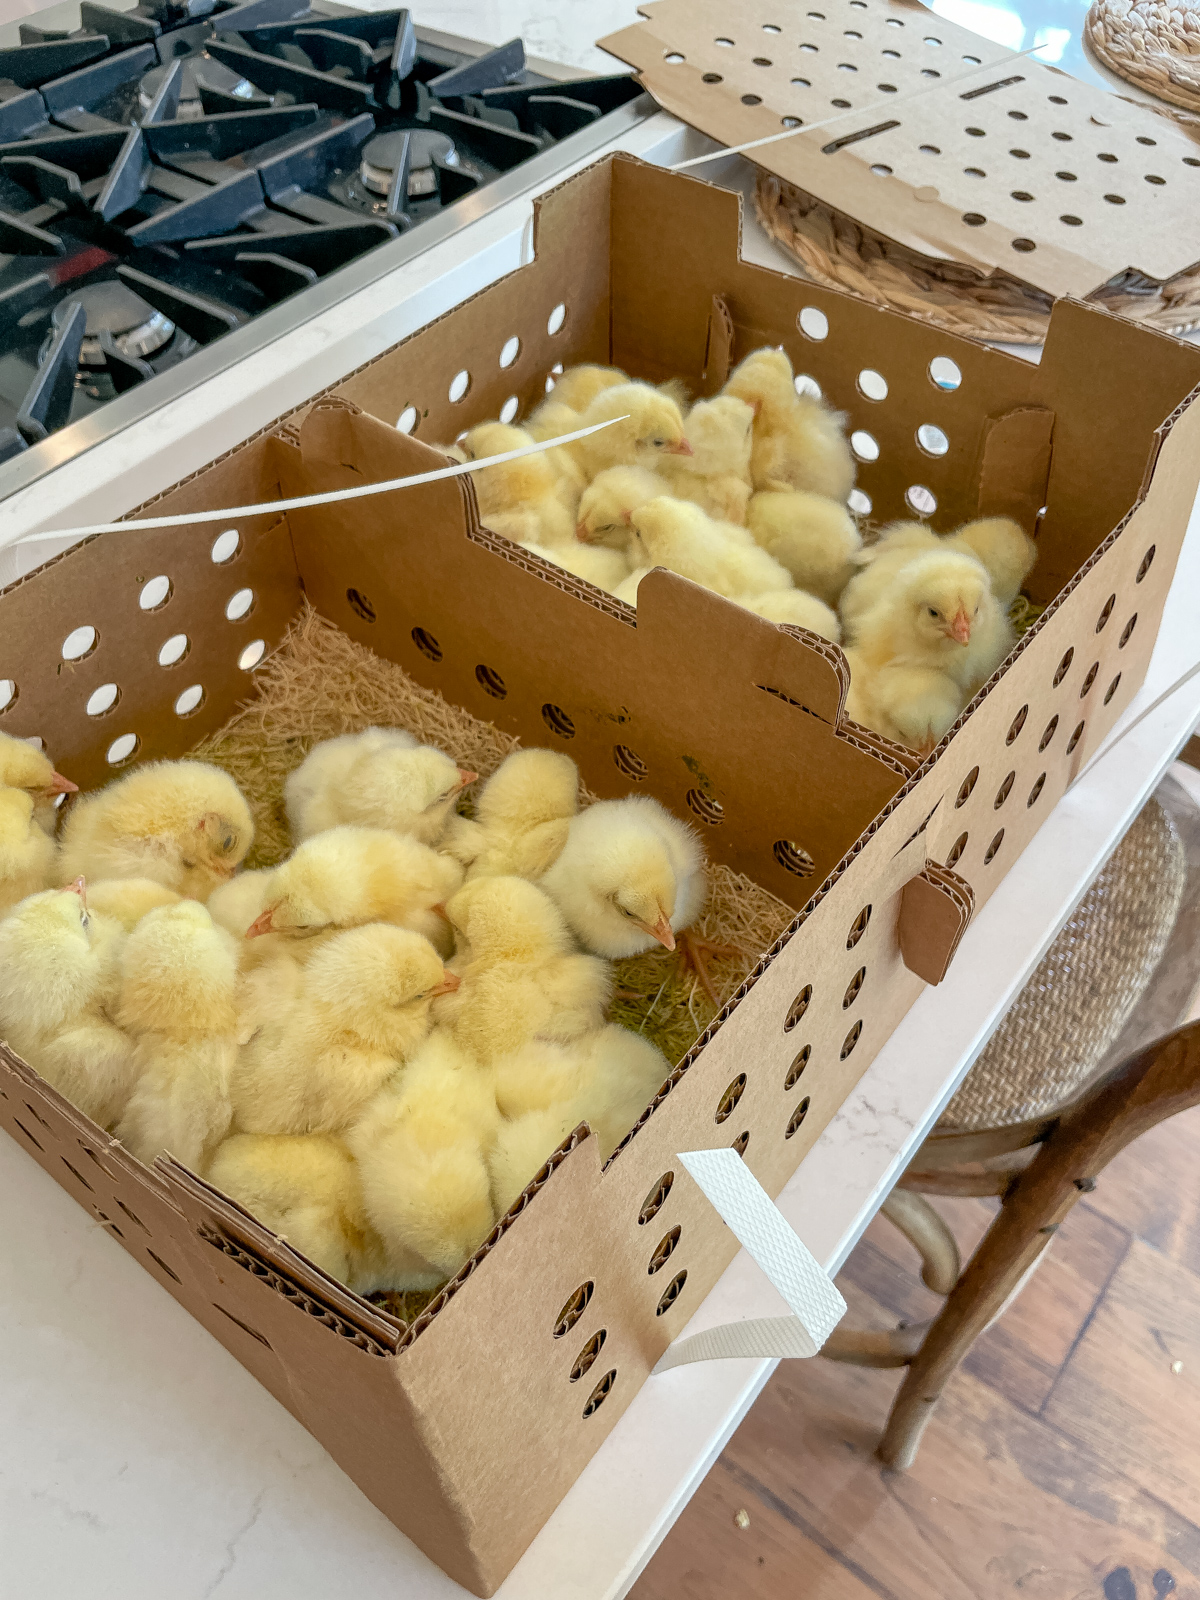 Cornish Cross chicks arriving in the mail